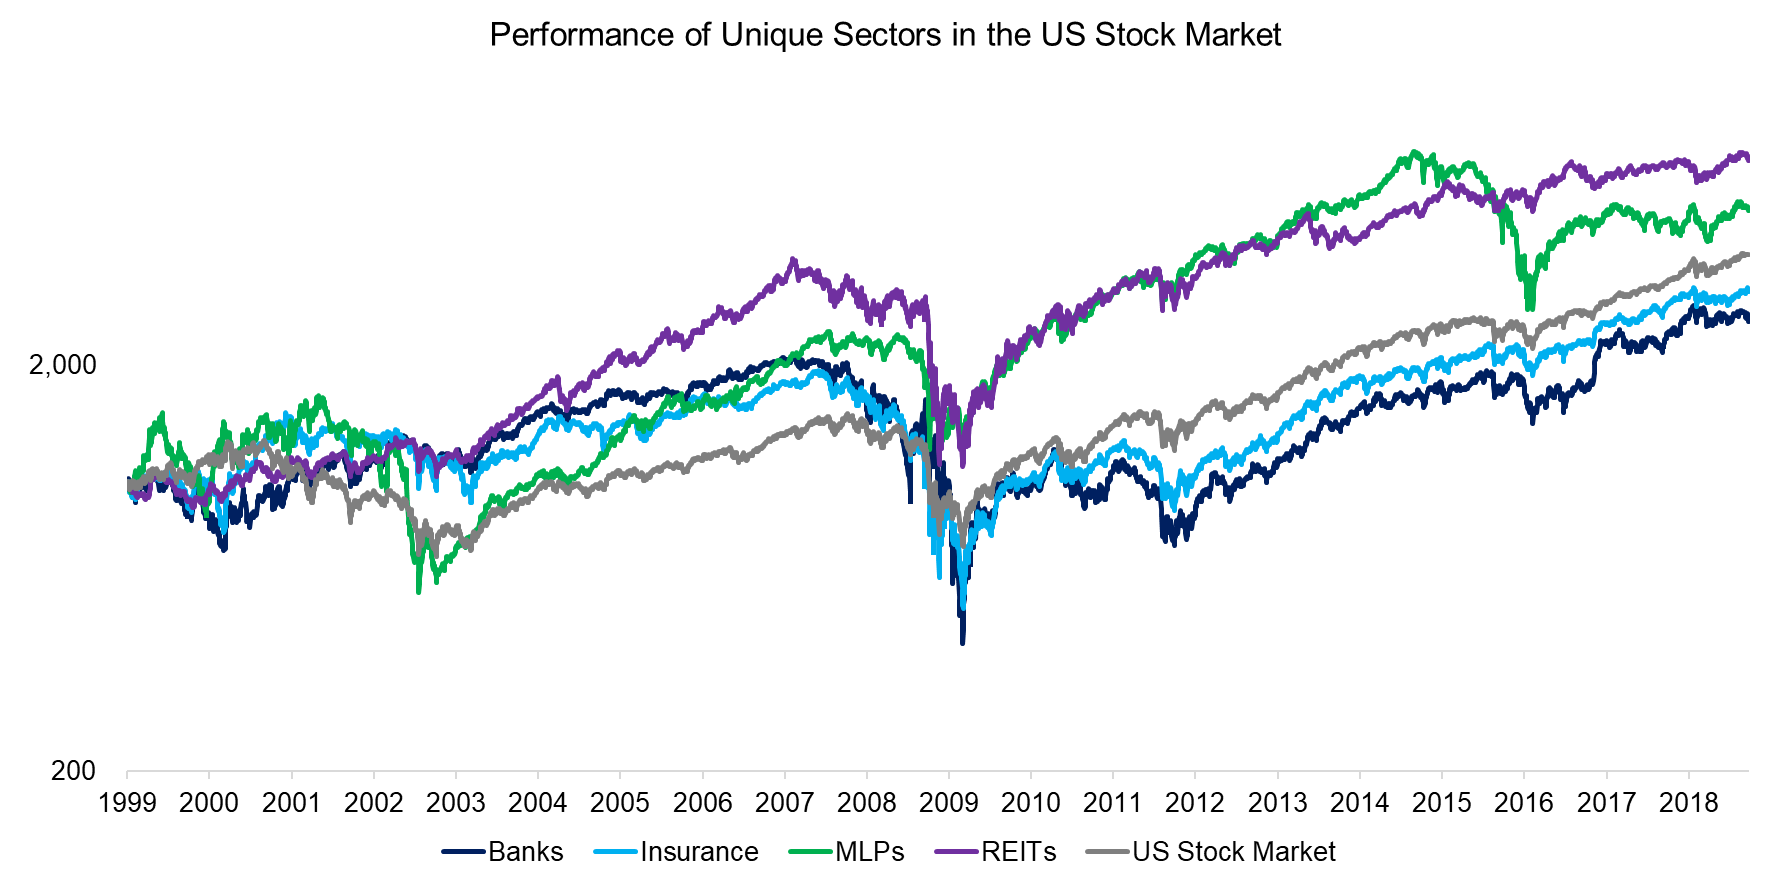 Performance of Unique Sectors in the US Stock Market